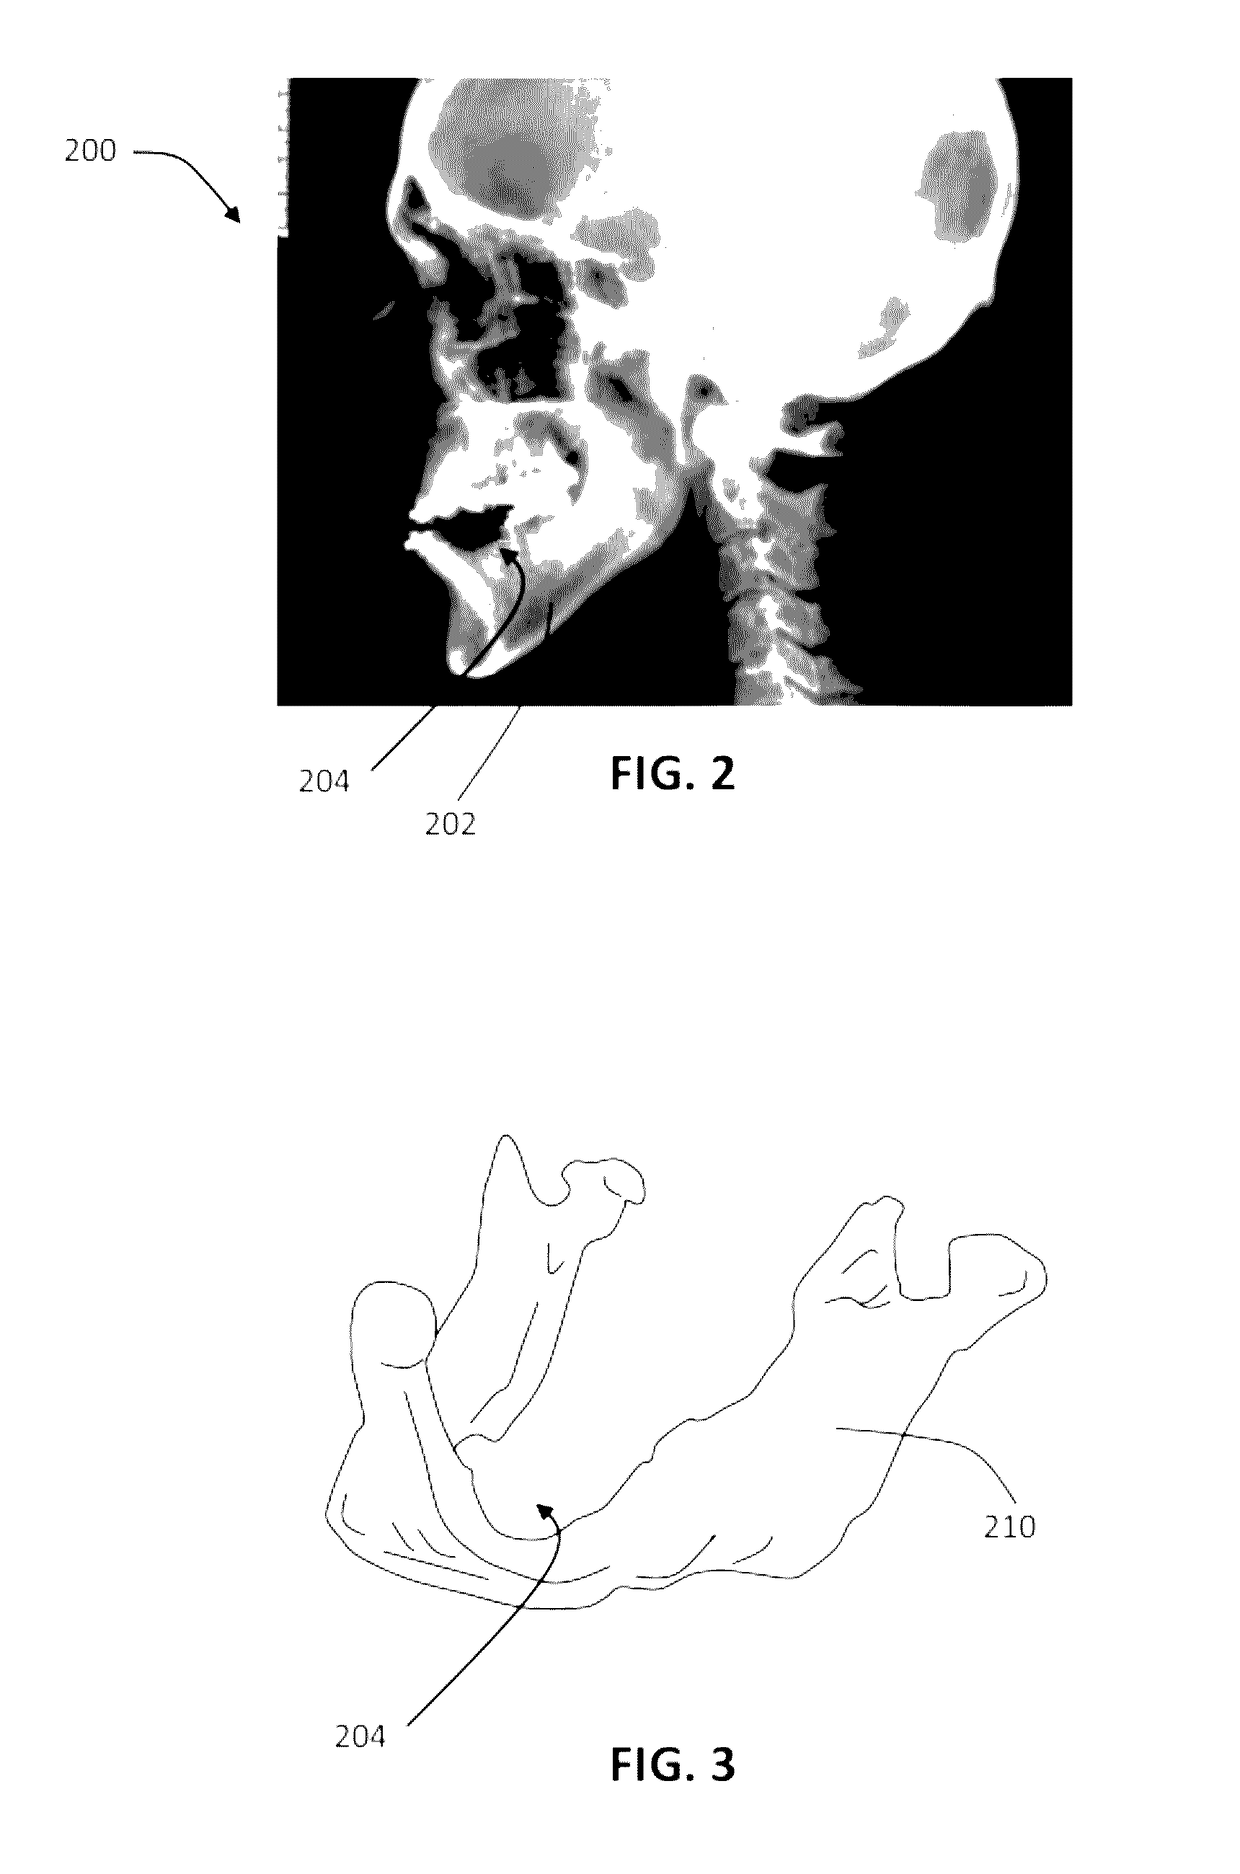 Patient-specific manufacturing of porous metal prostheses